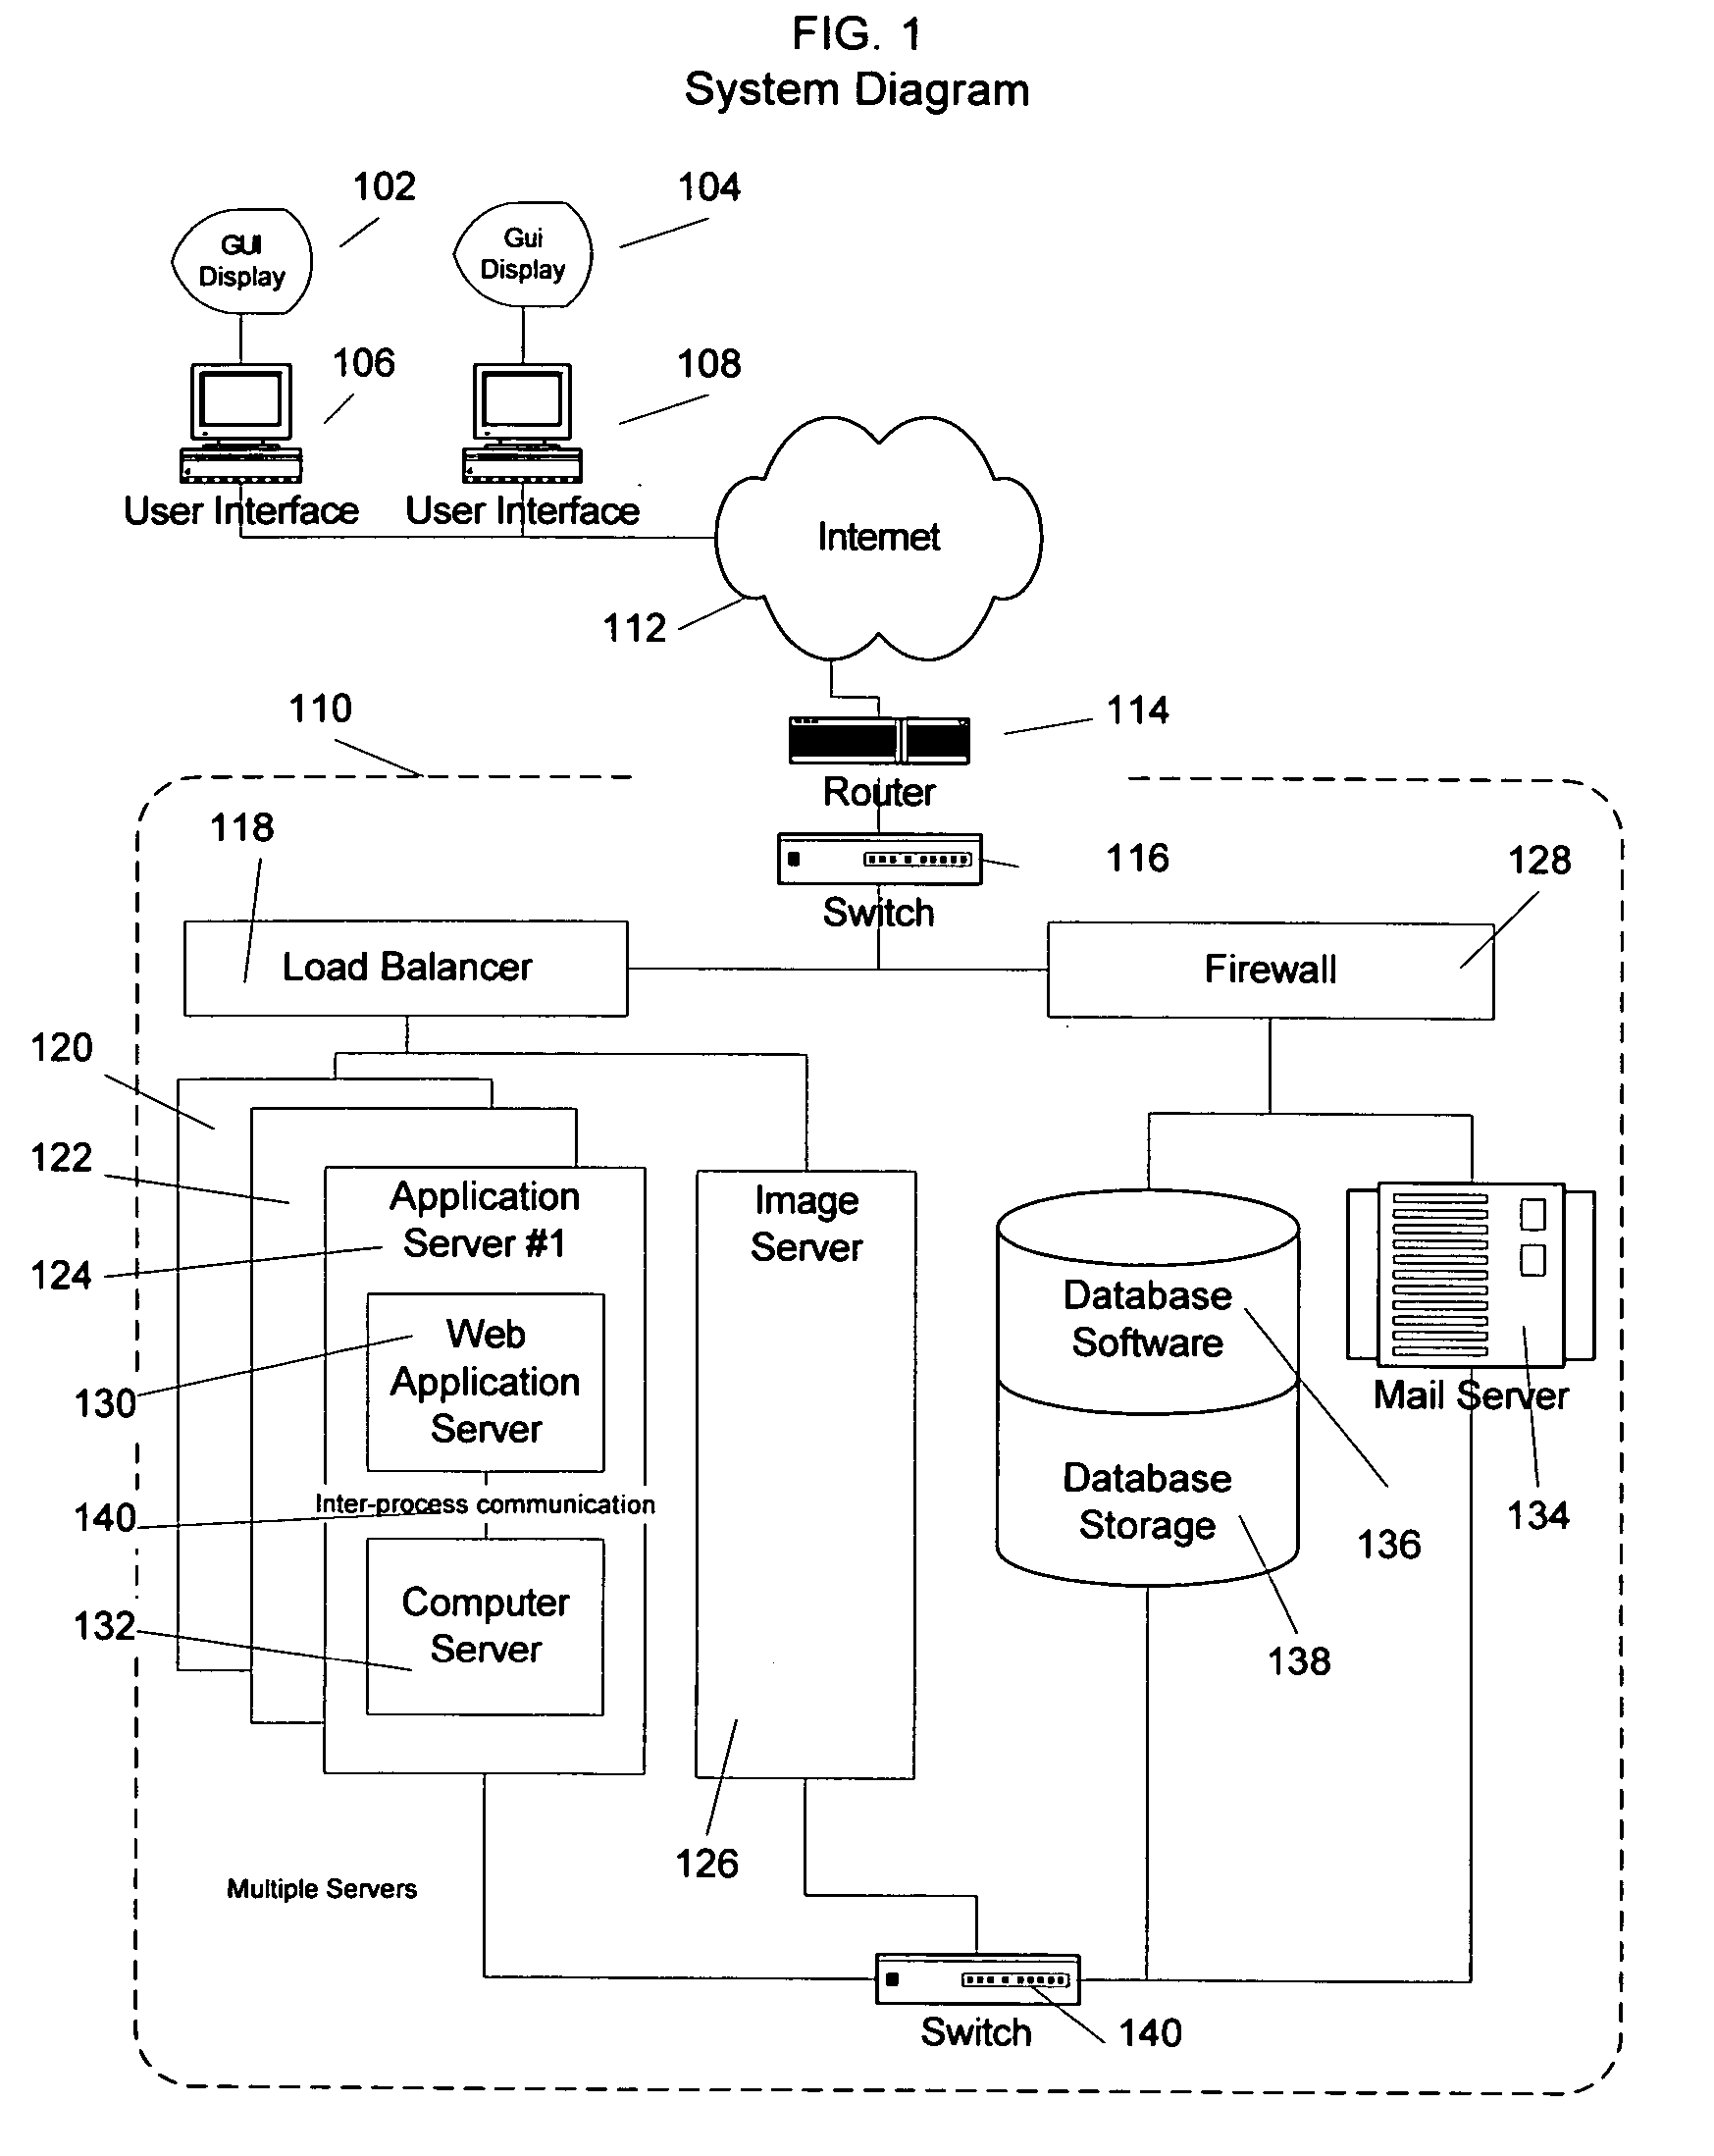 System, method and apparatus for connecting users in an online computer system based on their relationships within social networks